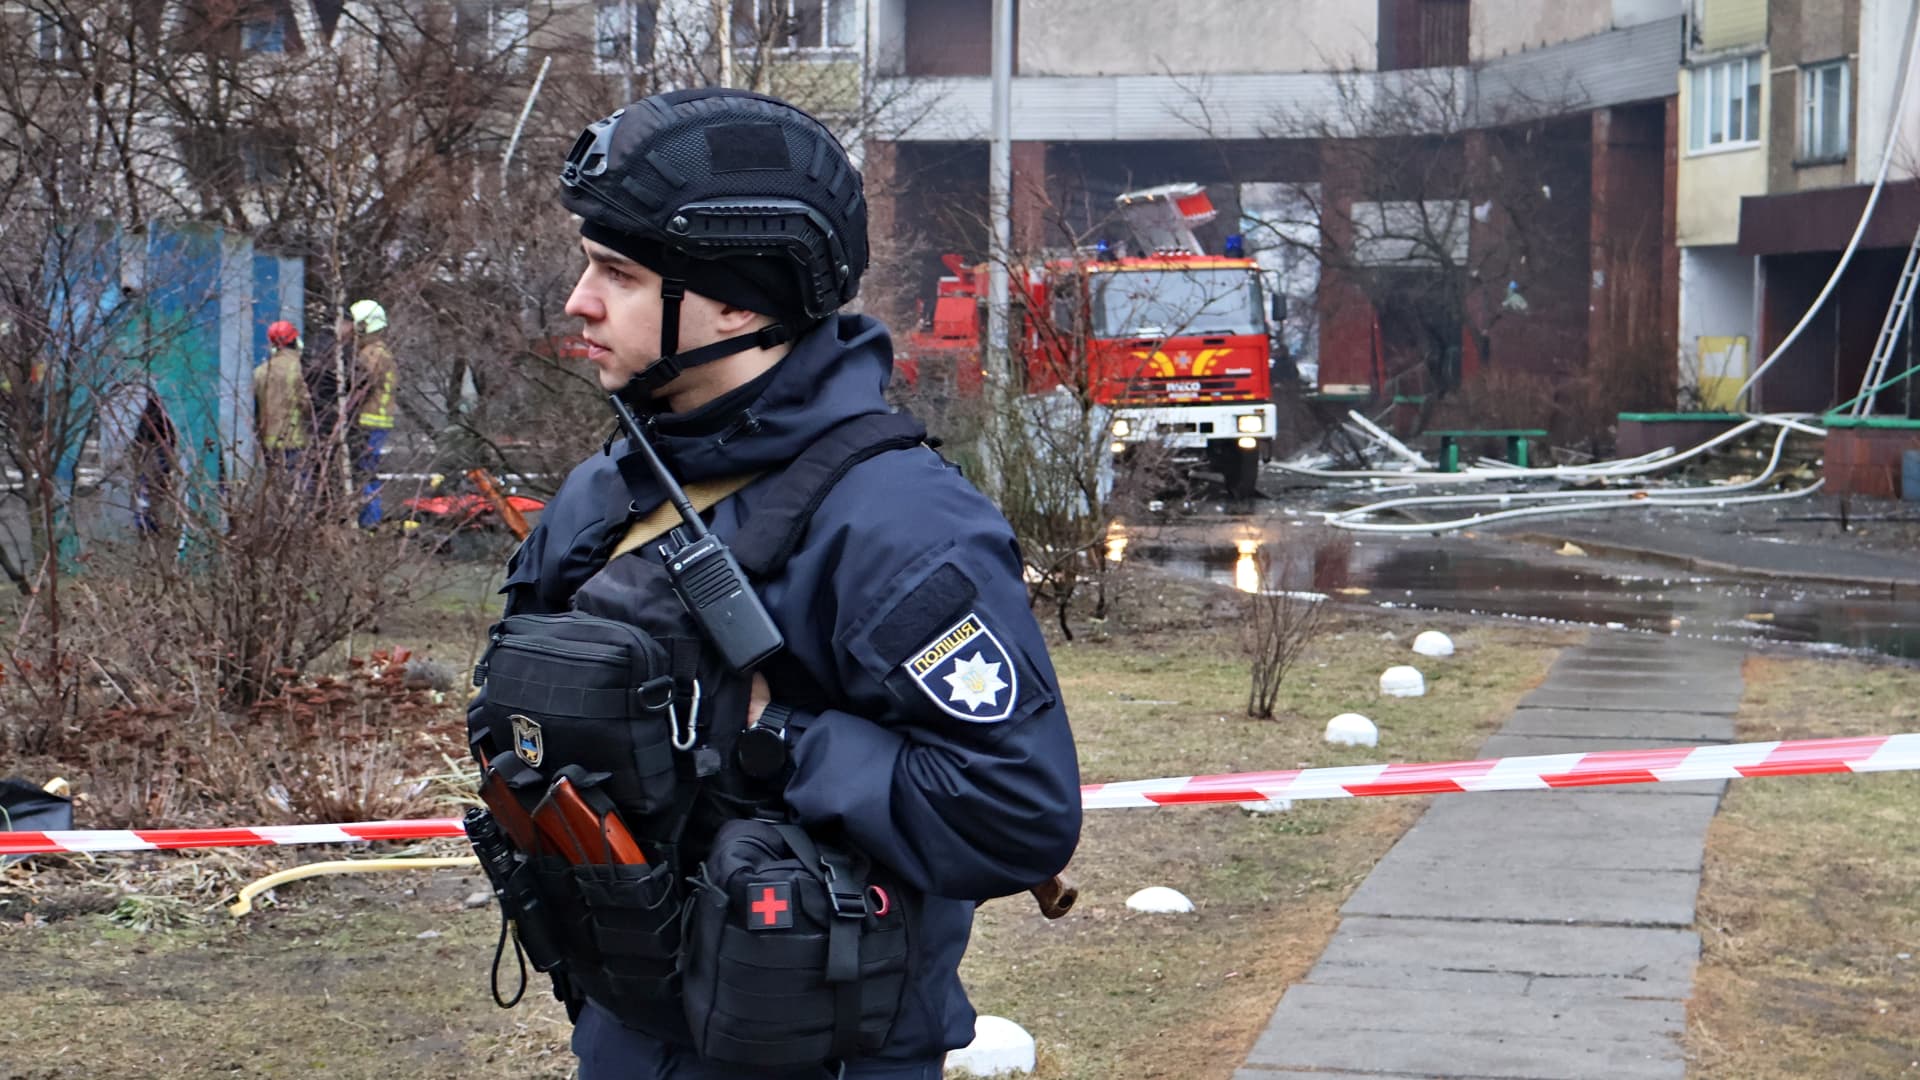 Emergency services stand near the site of a missile attack in a residential area of the city in Kyiv. Russia launched a missile strike on Kyiv, Ukraine, according to the statement from local authorities, more than 20 rockets were shot down. 